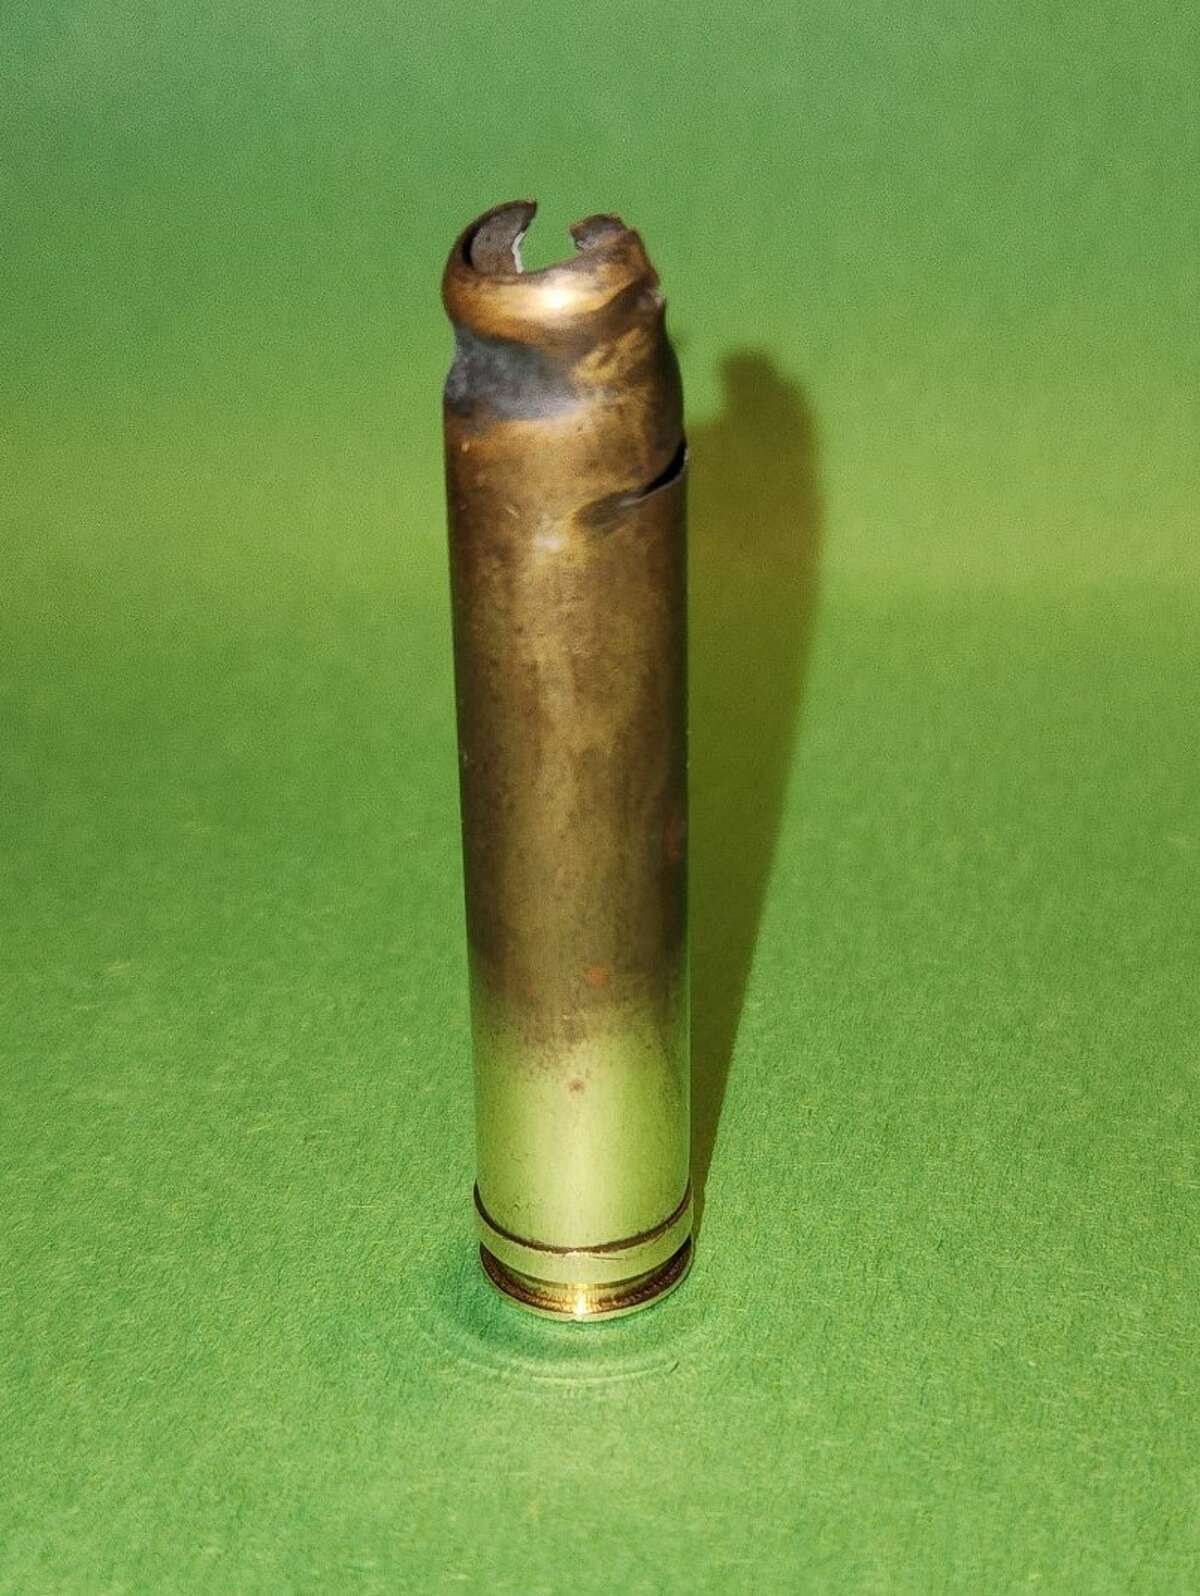 This 7mm Magnum case was once fired in a 300 Win Mag rifle and exploded. I cleaned the bottom of the case with IOSSO Metal Polish and in just a second it shined like new.